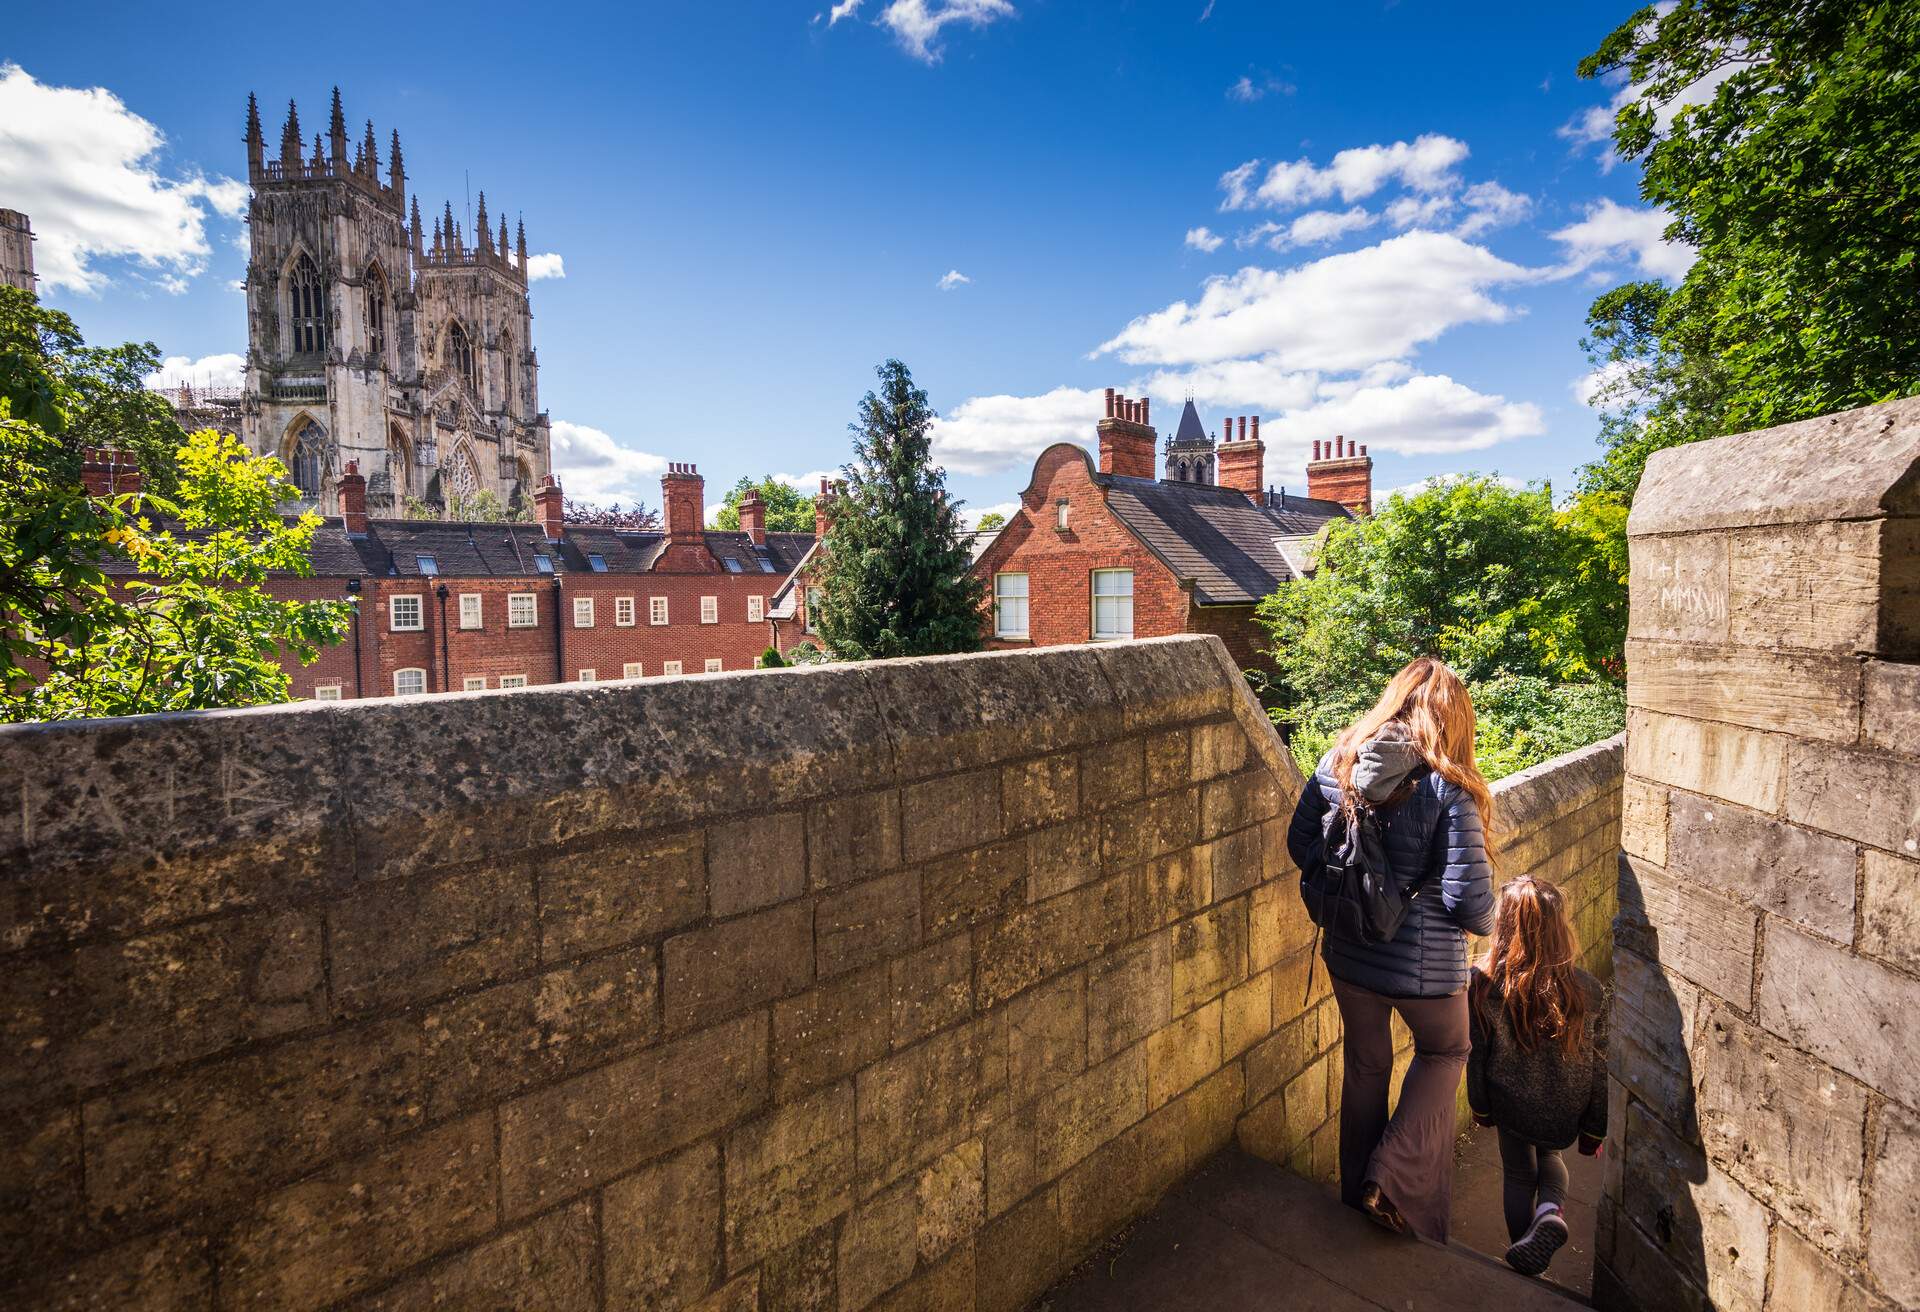 DEST_UK-ENGLAND_YORK_THEME_PEOPLE_MOTHER_AND_DAUGHTER_ALONG_CITY-WALLS_GettyImages-1026947736